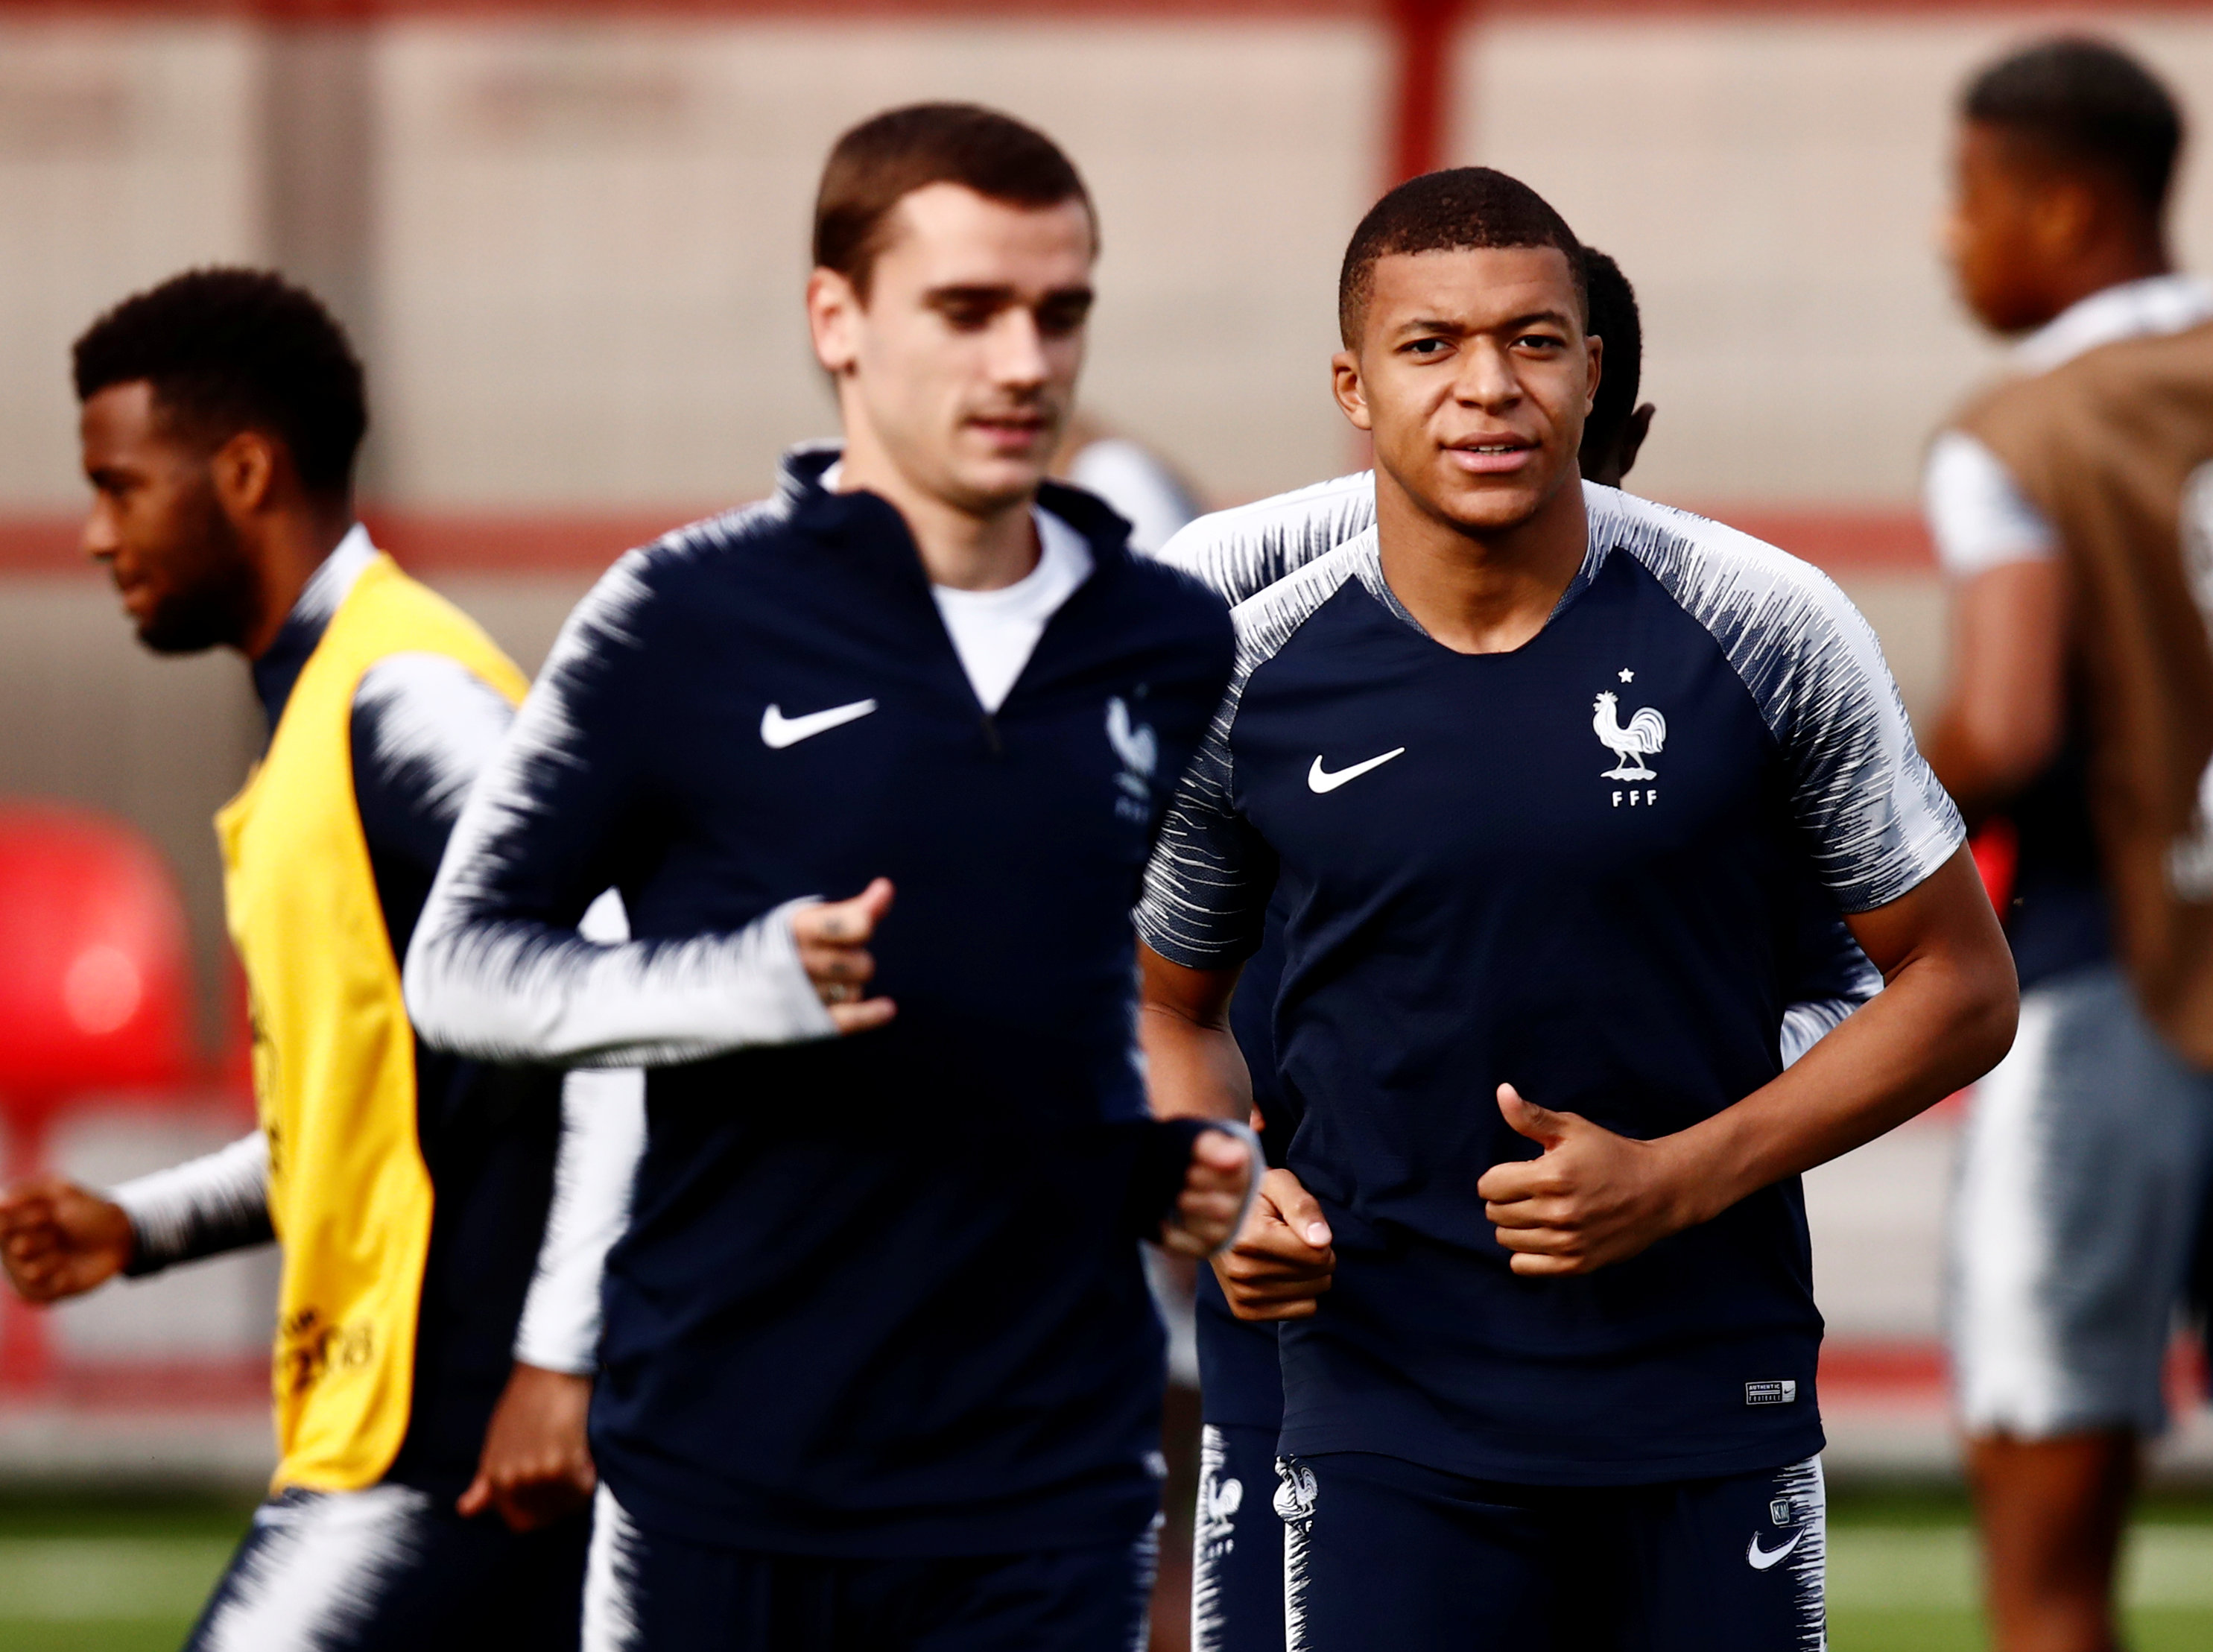 Football: France favourites as Moscow basks in World Cup spotlight